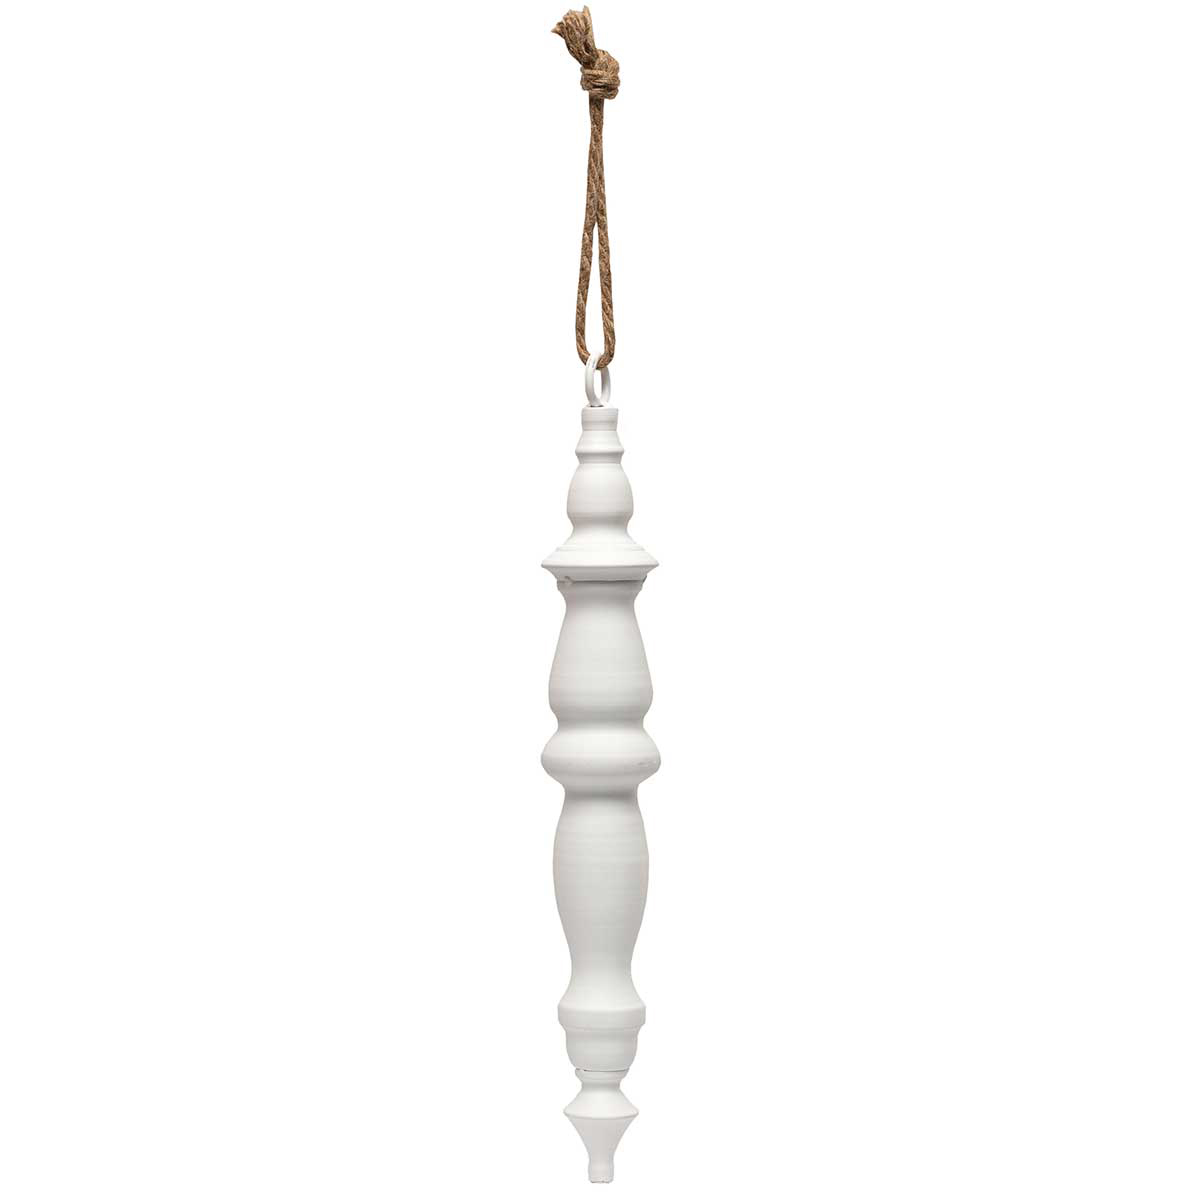 !FINIAL METAL ORNAMENT MATTE WHITE WITH ROPE HANGER LARGE